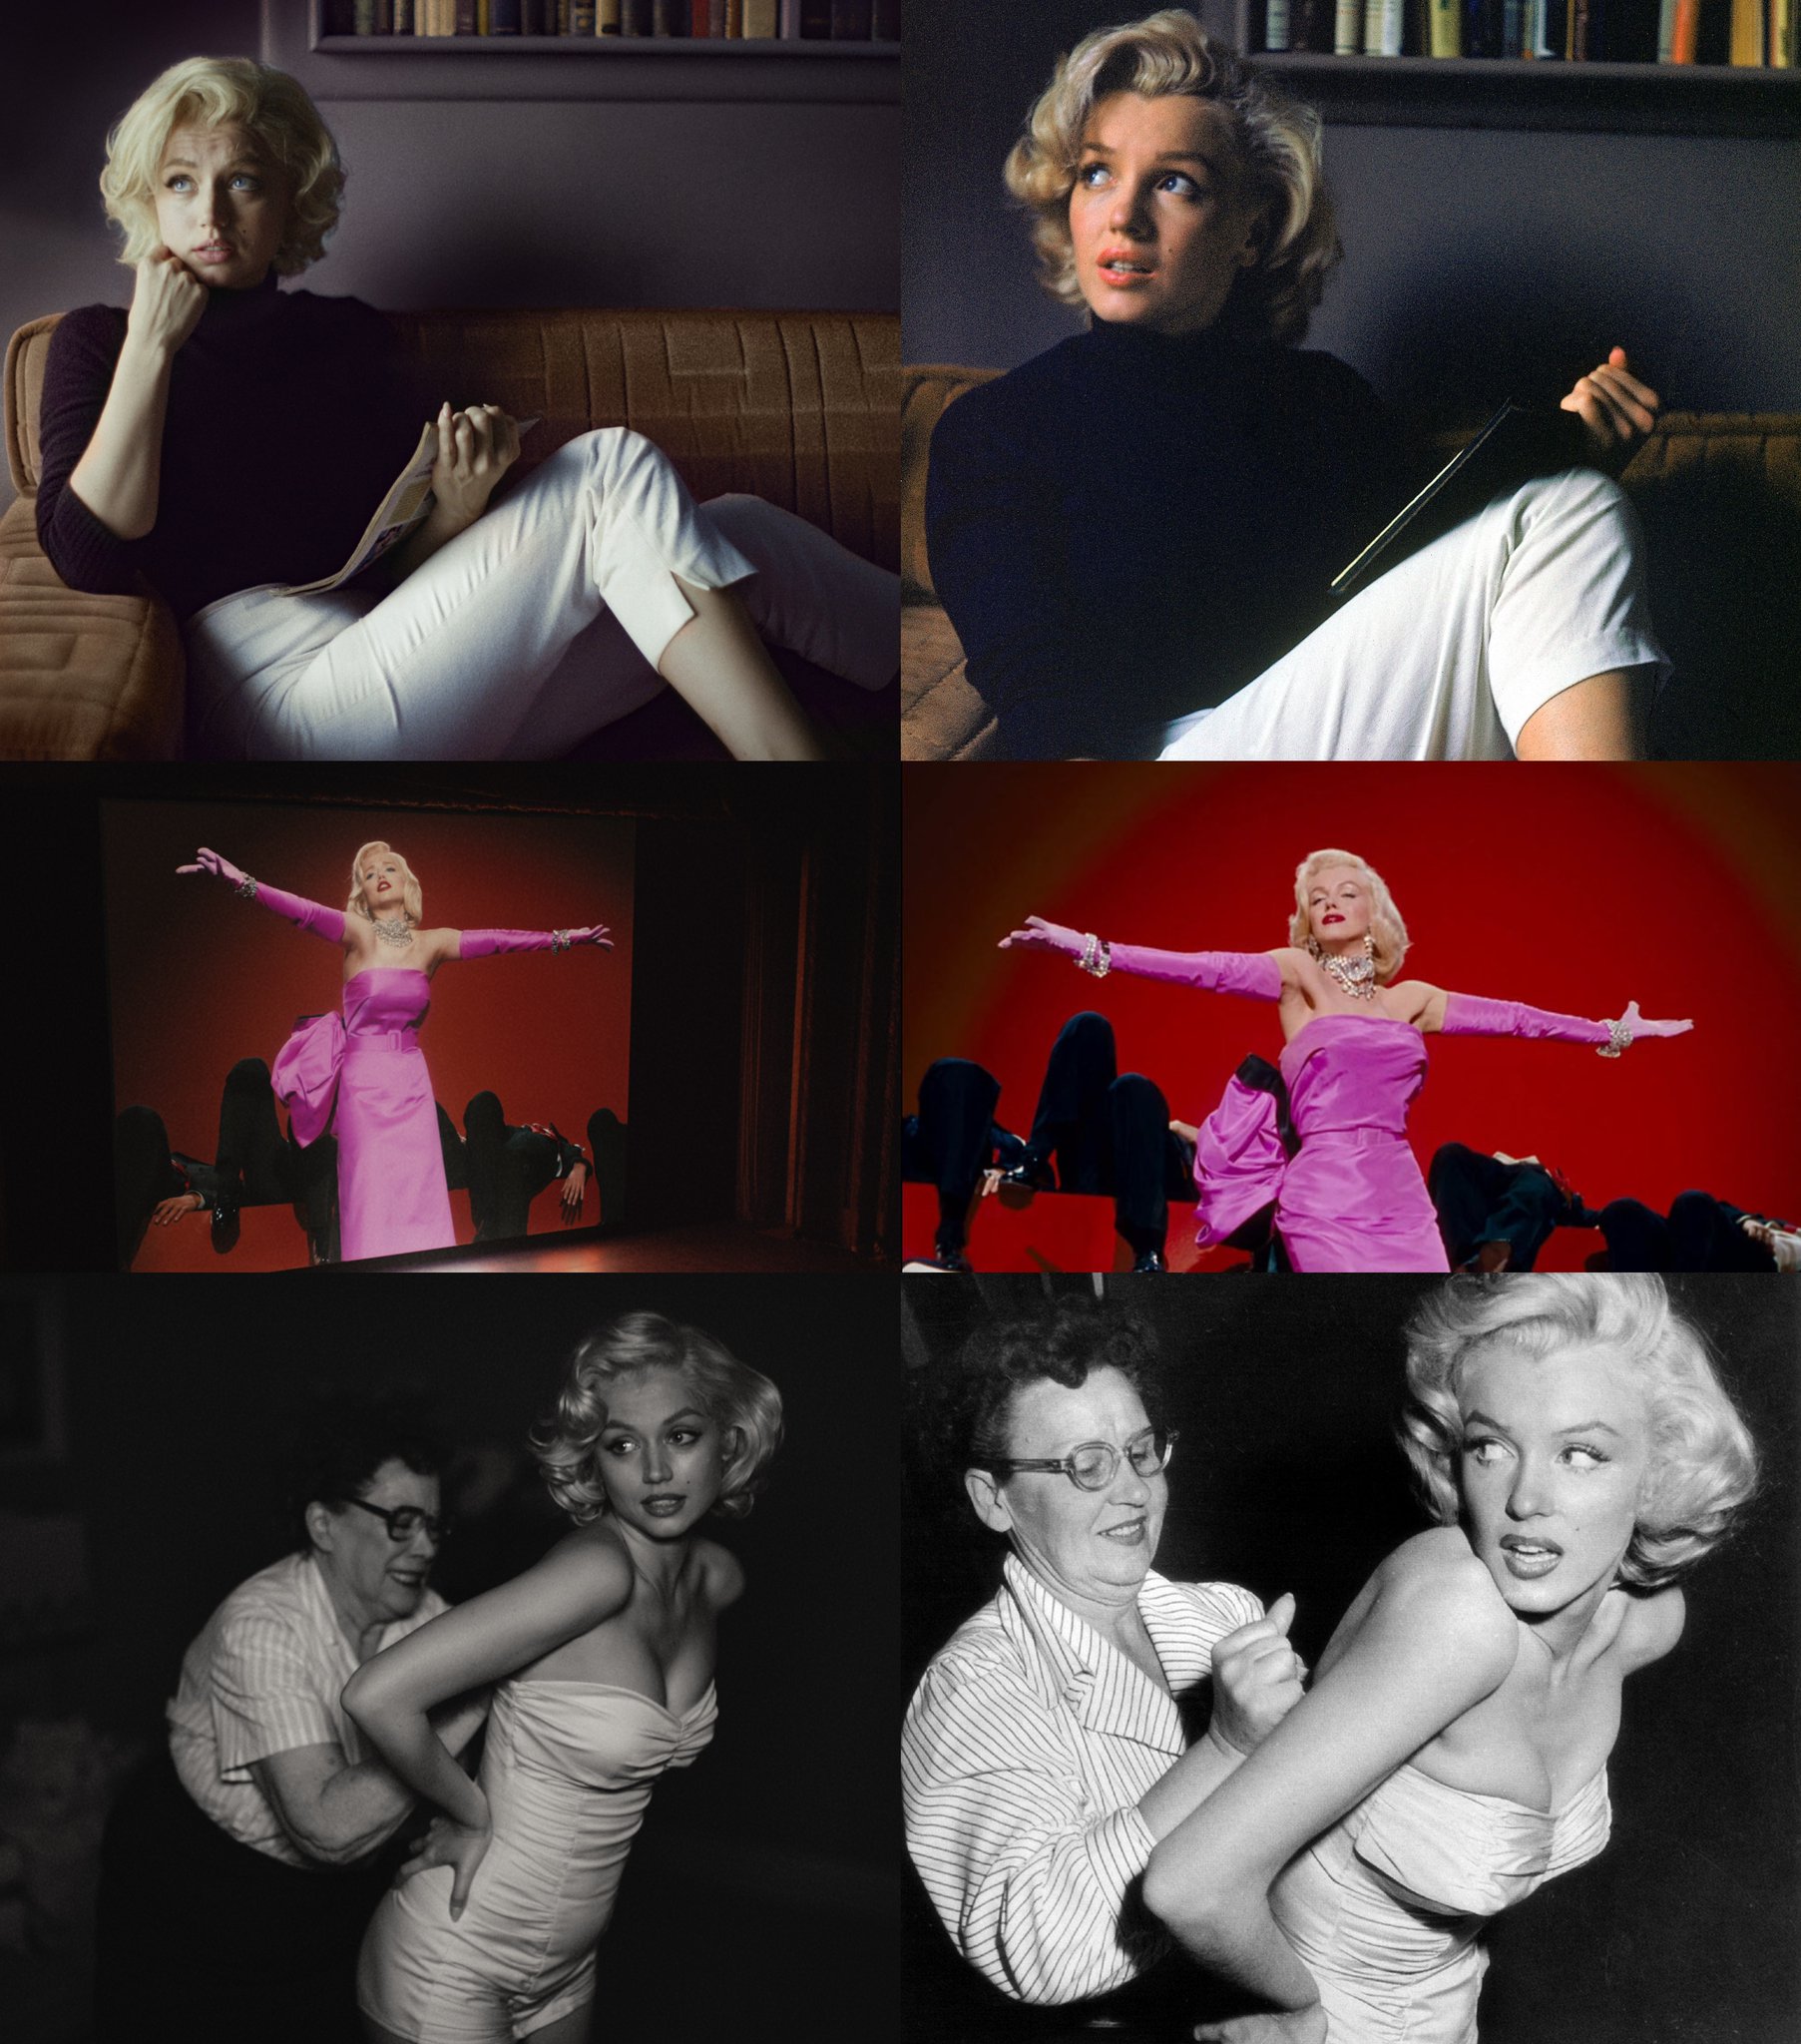 Marilyn and Ana